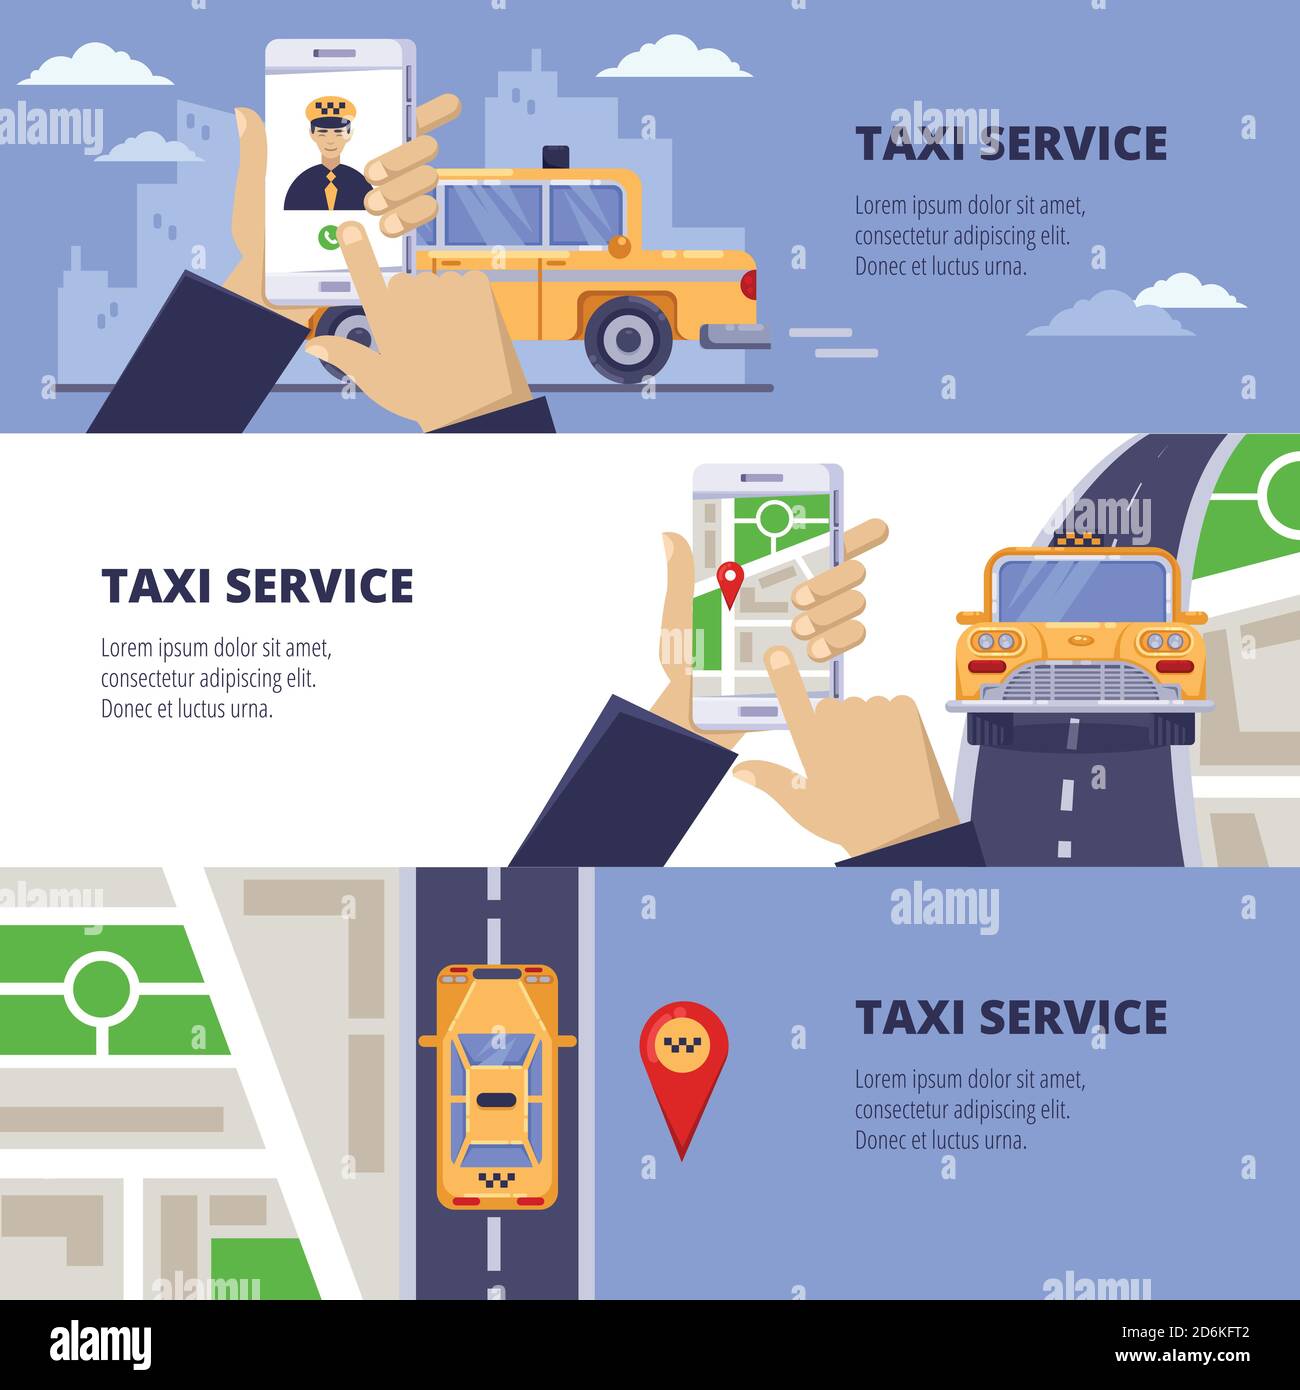 Taxi service travel concept. Vector illustration of yellow cab on road and mobile app on smartphone screen. Stock Vector